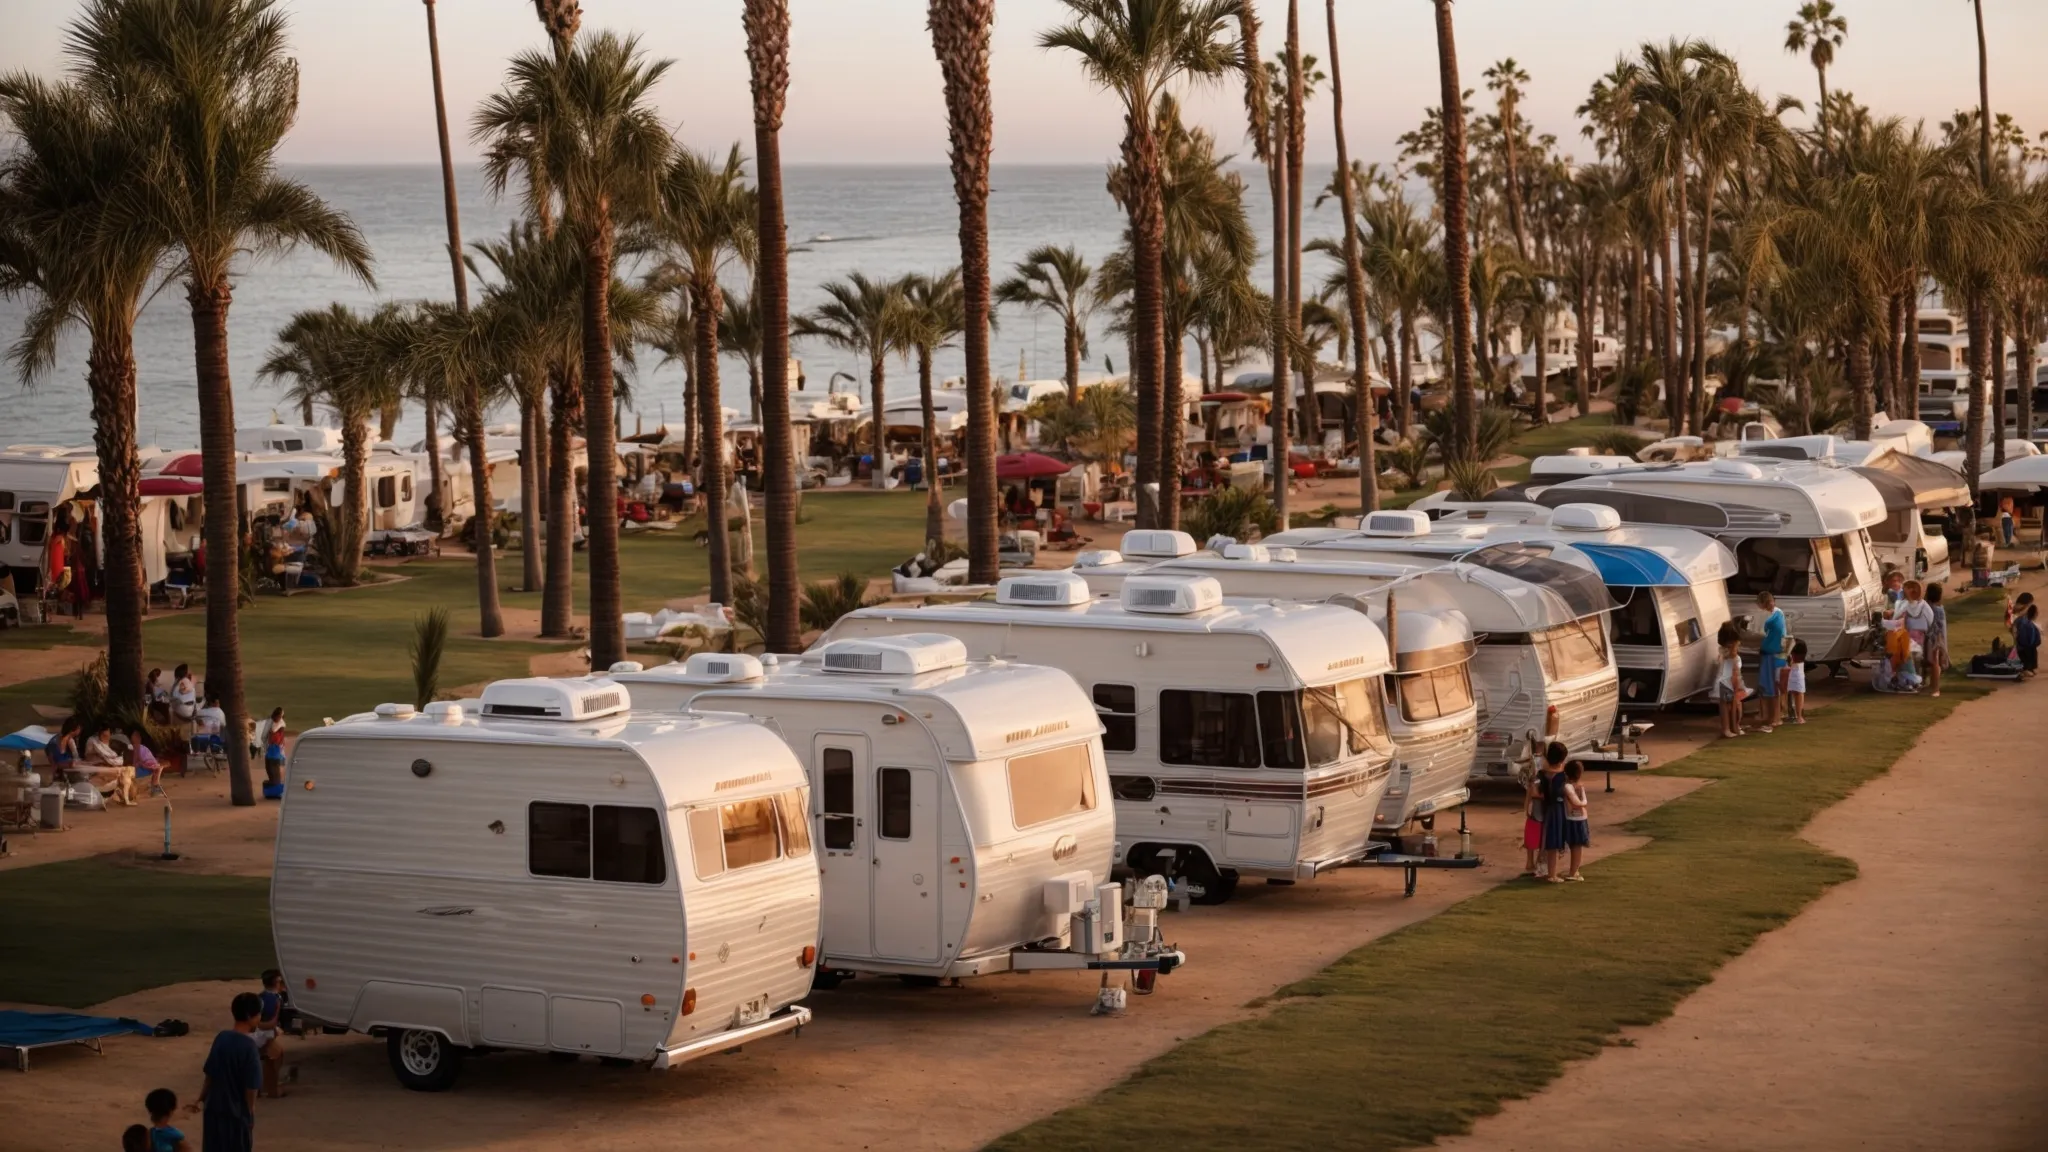 picture a row of rvs parked by the sparkling san diego shoreline, with families enjoying barbecues amidst palm trees under a warm sunset.